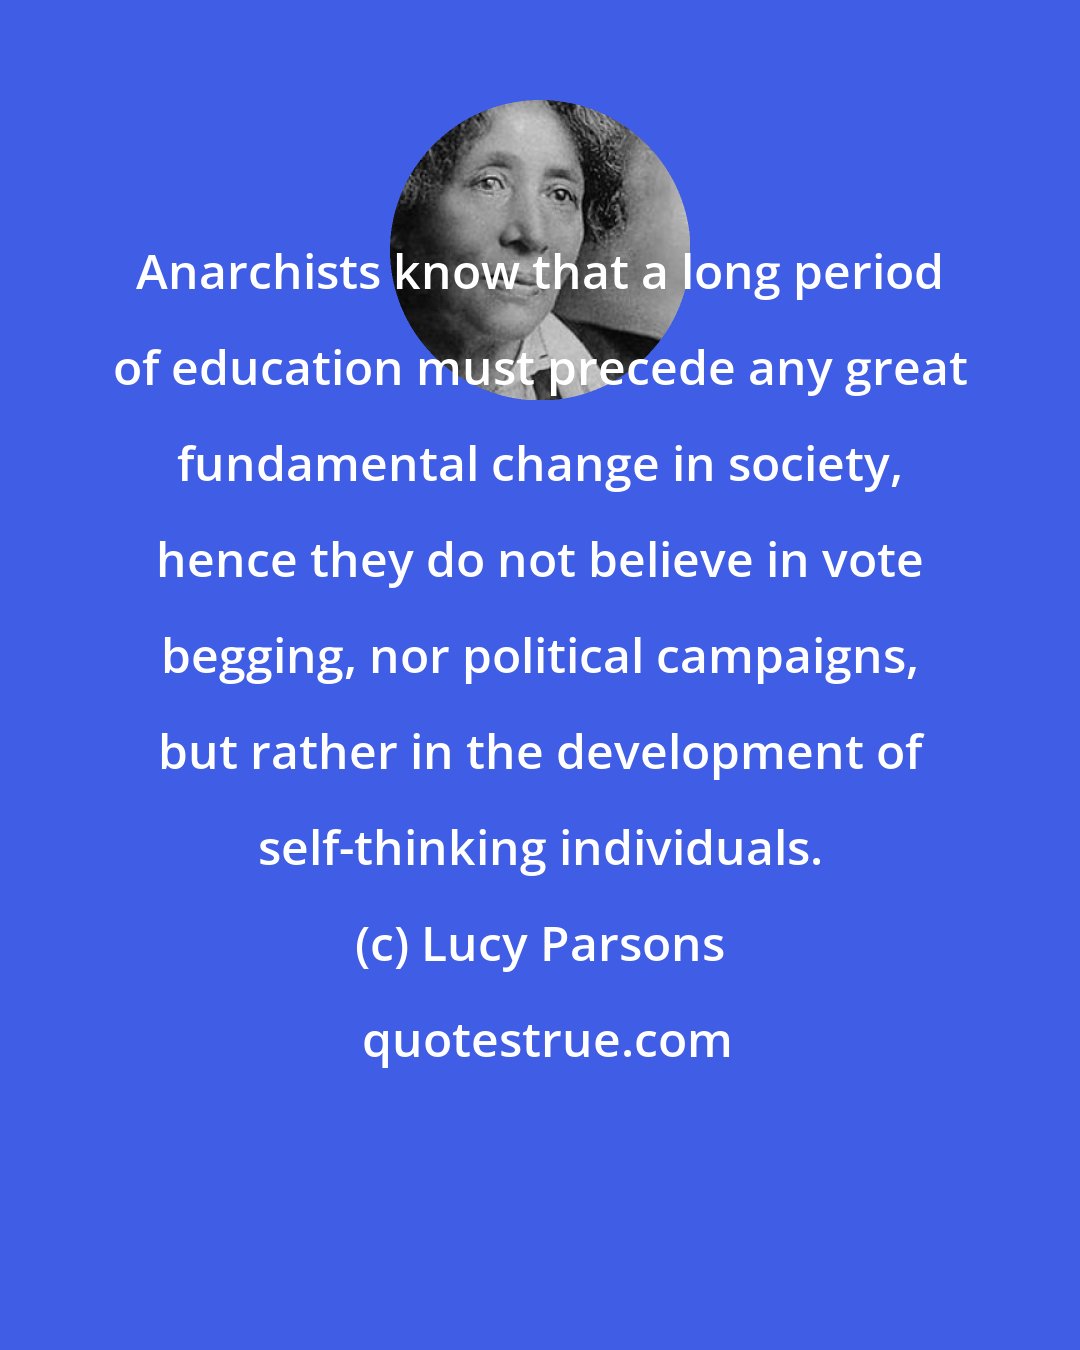 Lucy Parsons: Anarchists know that a long period of education must precede any great fundamental change in society, hence they do not believe in vote begging, nor political campaigns, but rather in the development of self-thinking individuals.